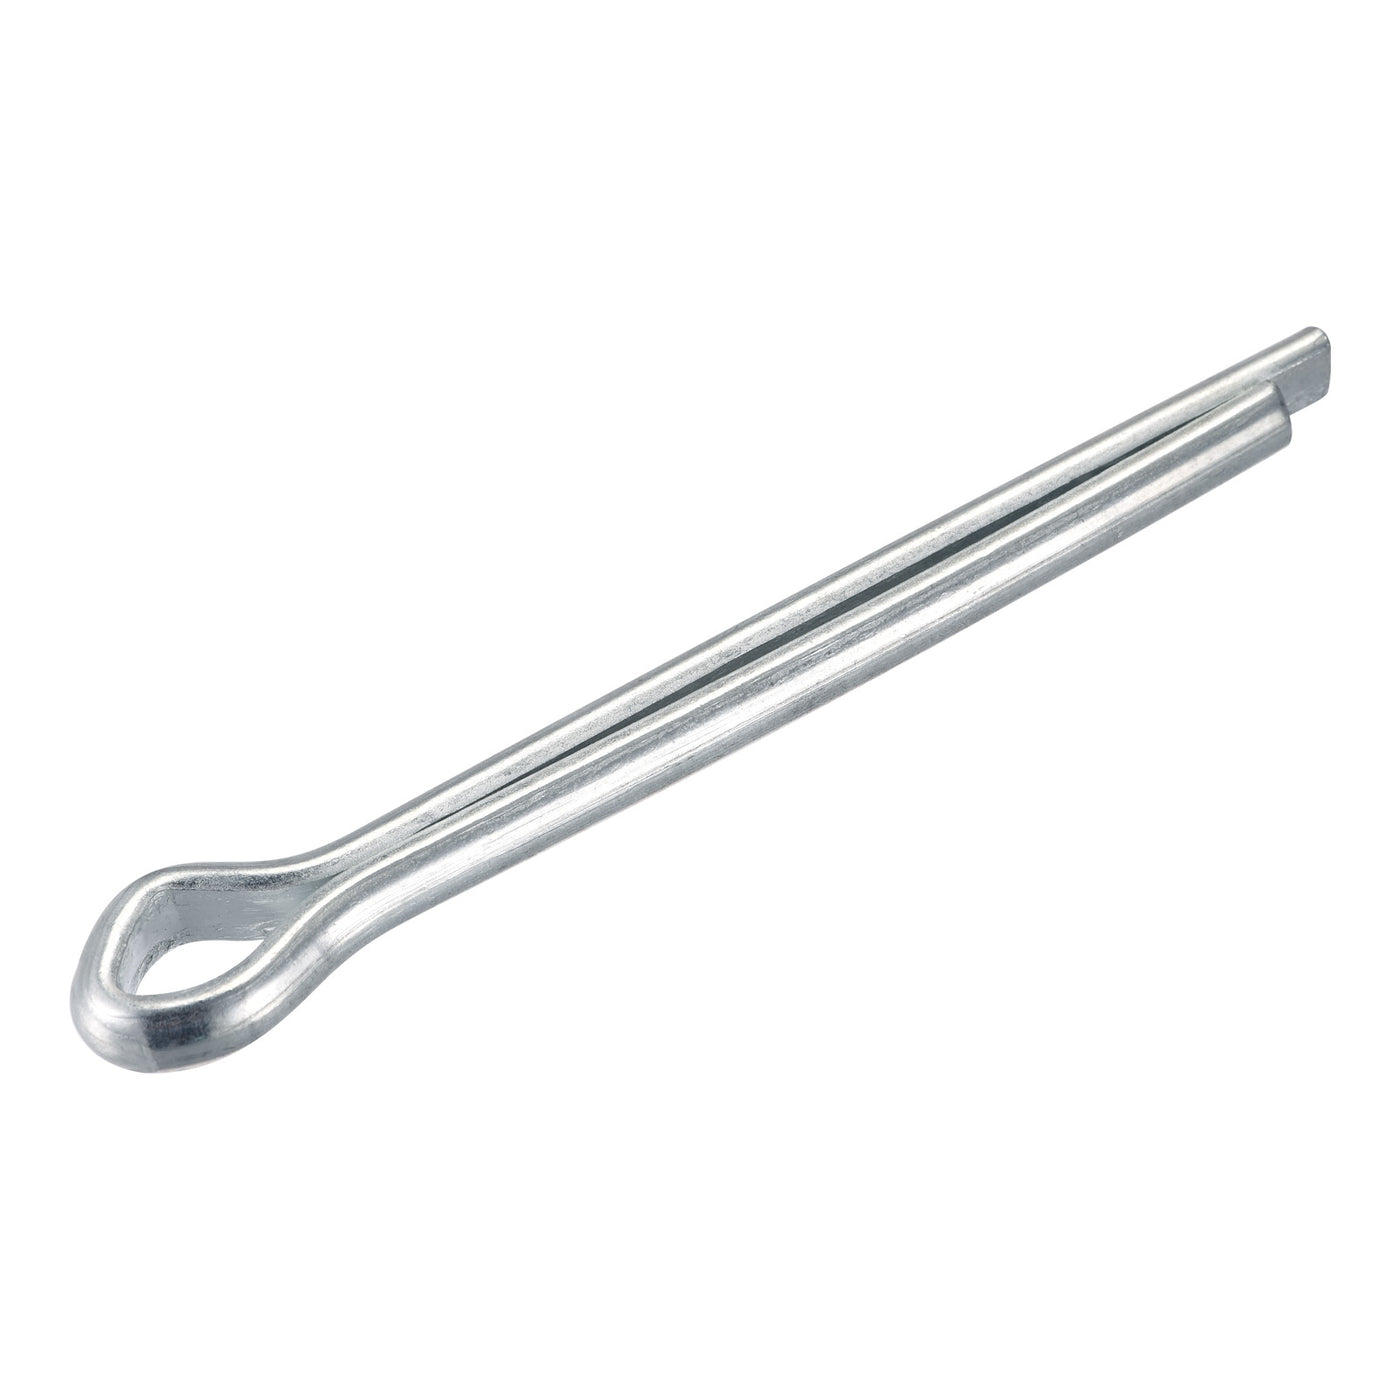 uxcell Uxcell Split Cotter Pin, 12mm x 120mm Carbon Steel Clip Fastener Fitting for Automotive, Mechanics, Silver Tone